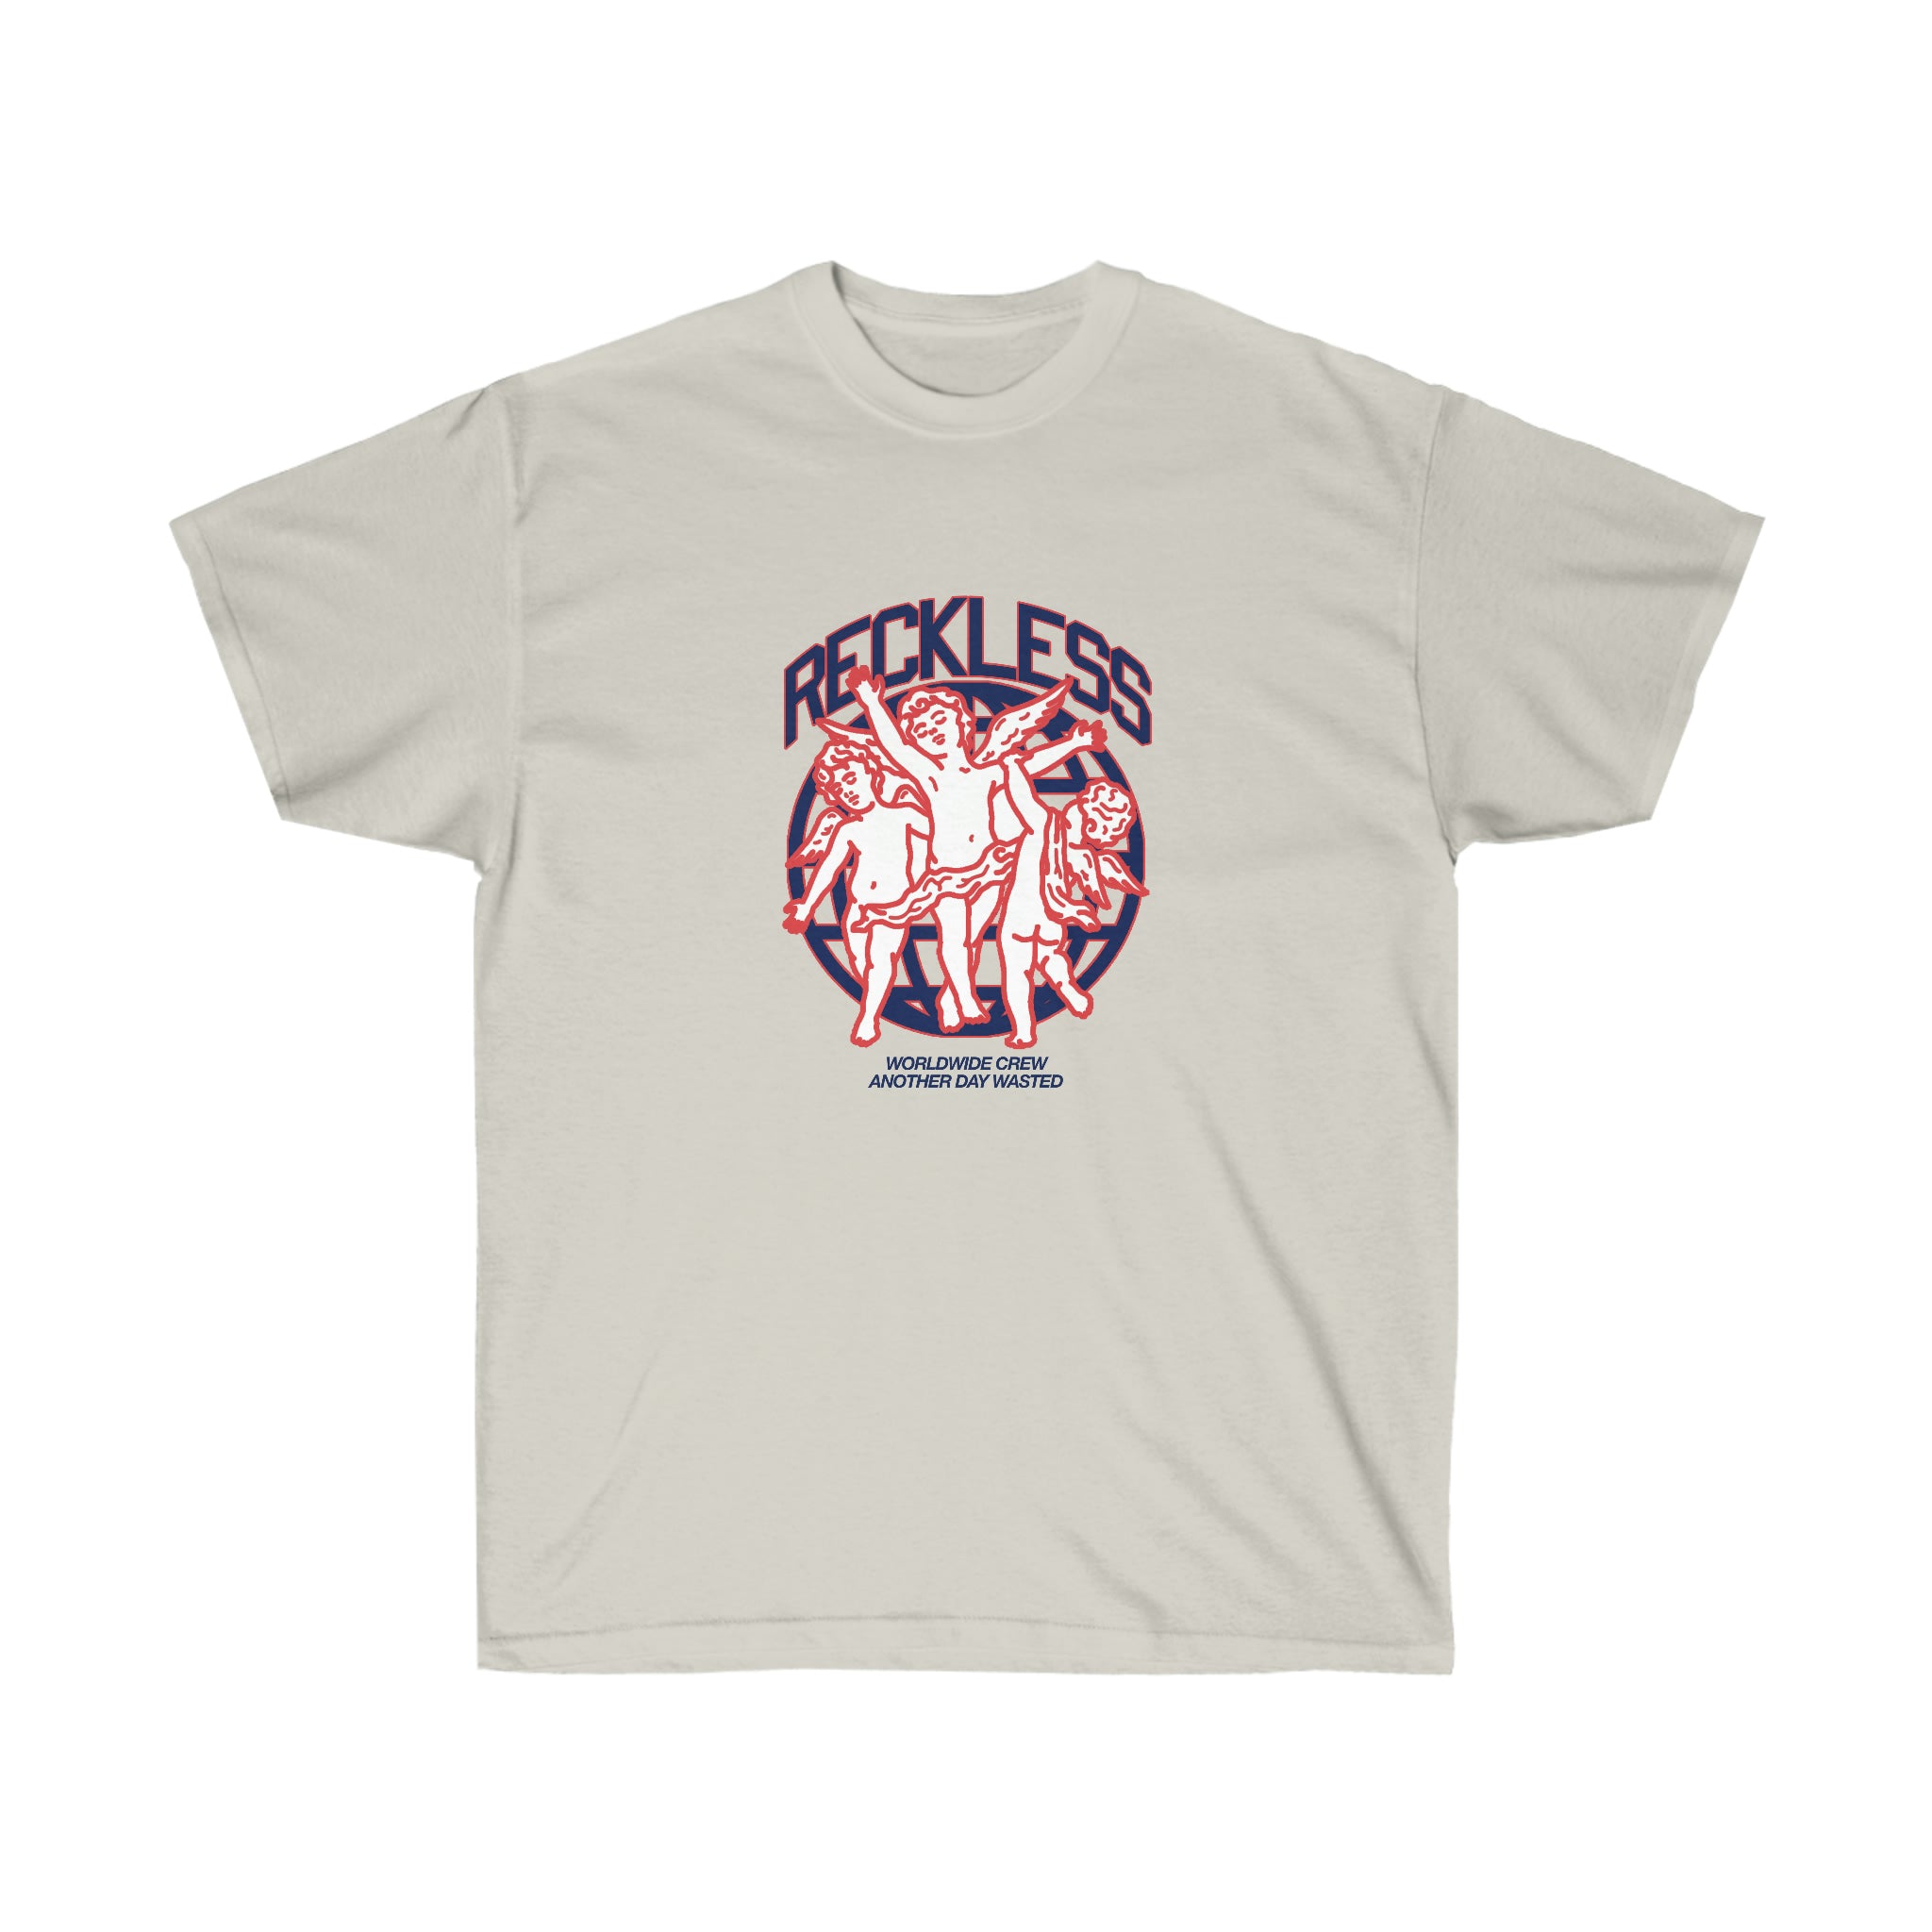 RECKLESS TEE